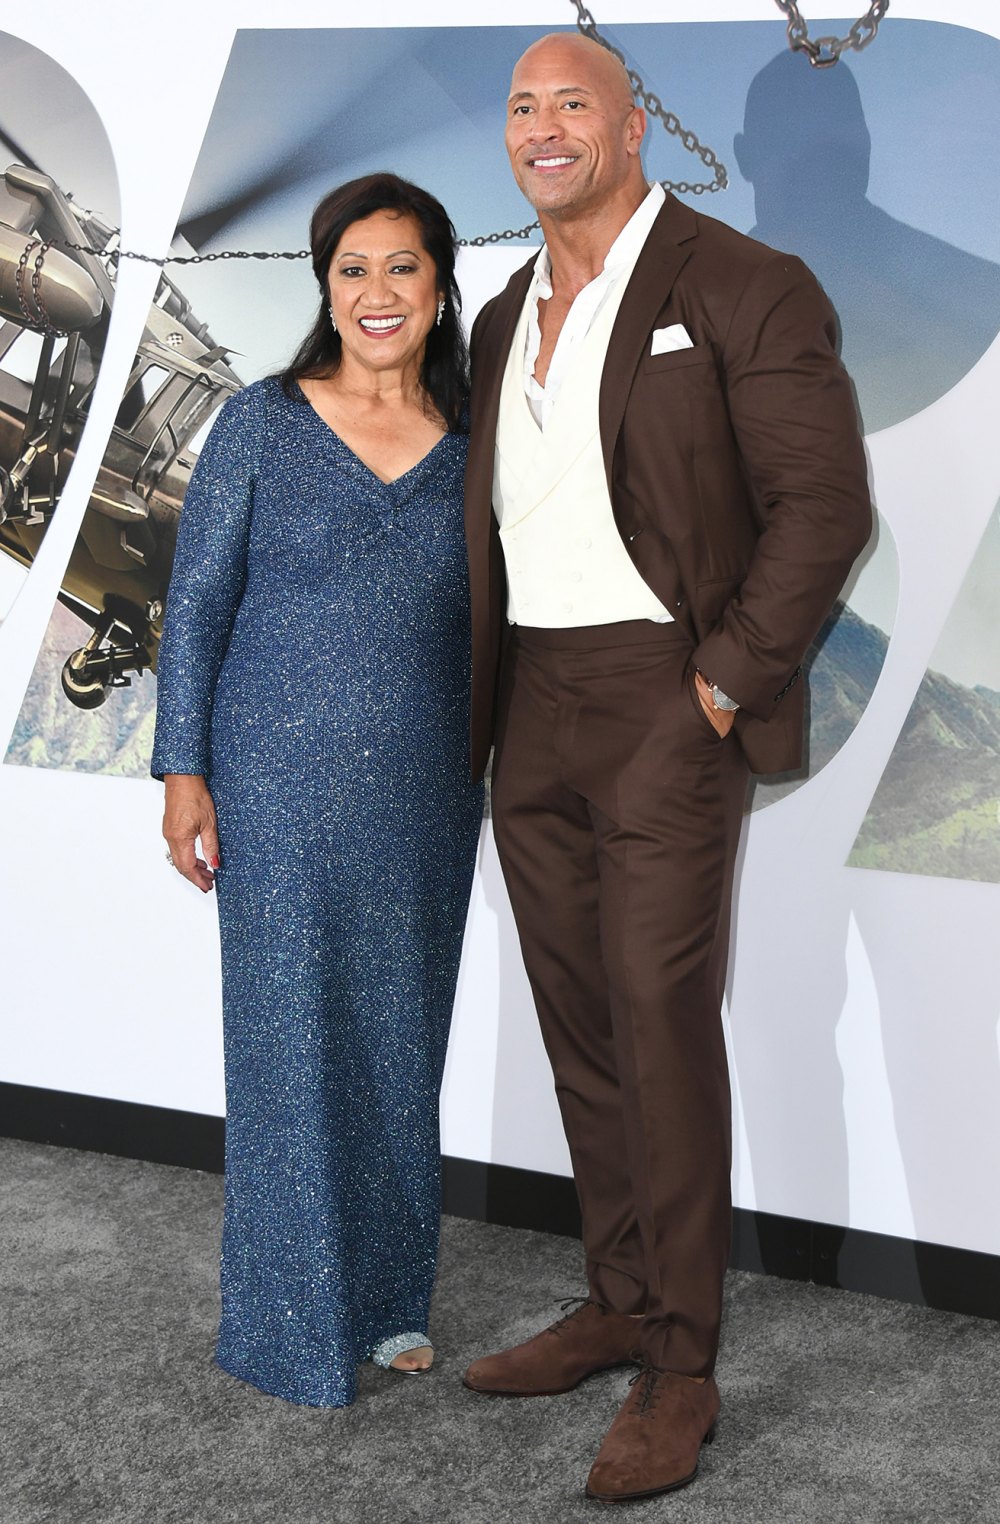 Dwayne Johnson Reflects on How His Mom Inspired His Success After Being Constantly Arrested